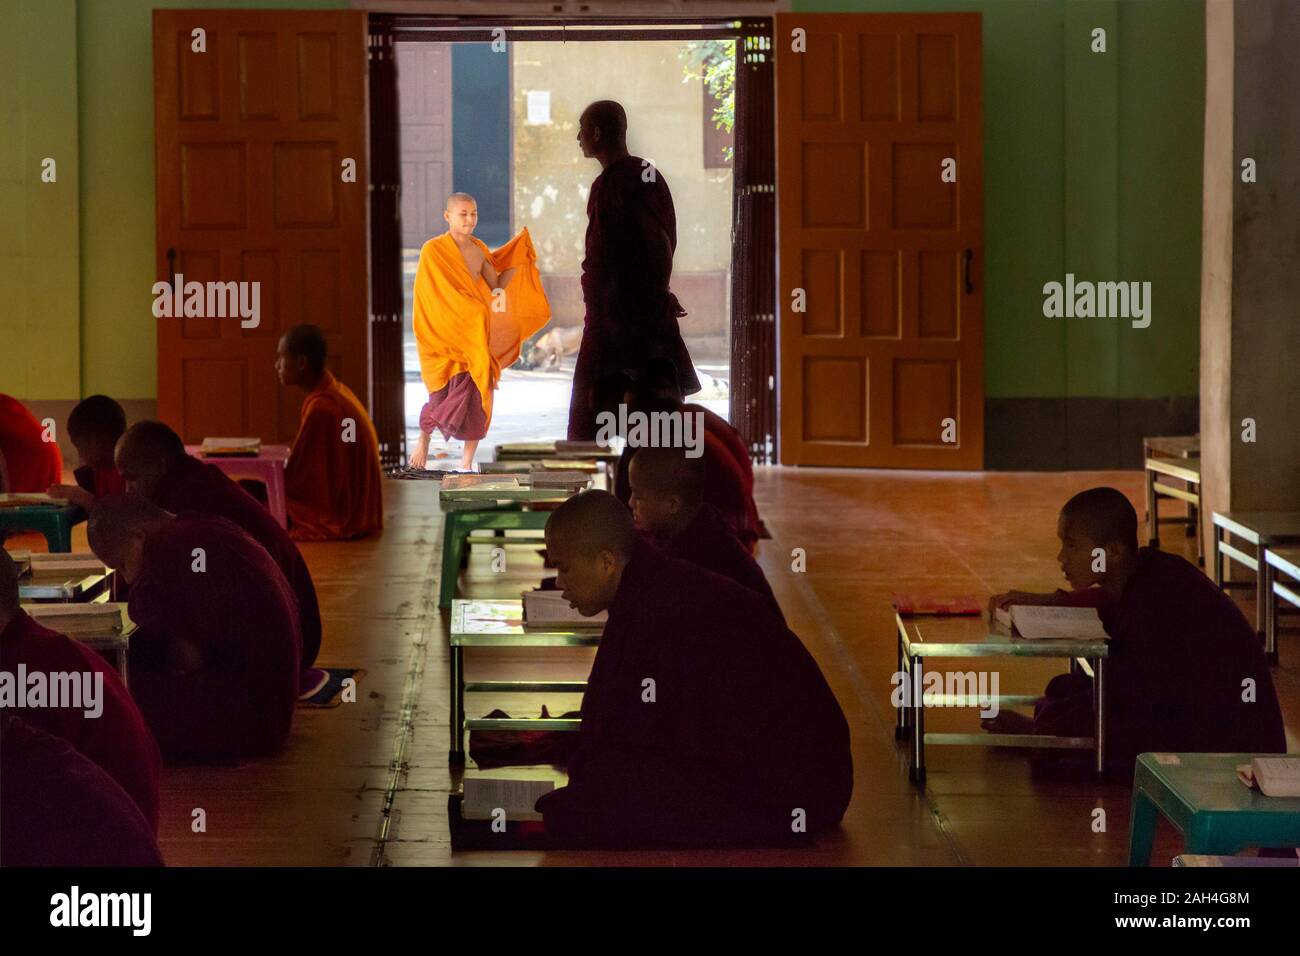 Monks reading and studying in the classroom of the monastery in Mandalay, Myanmar Stock Photo